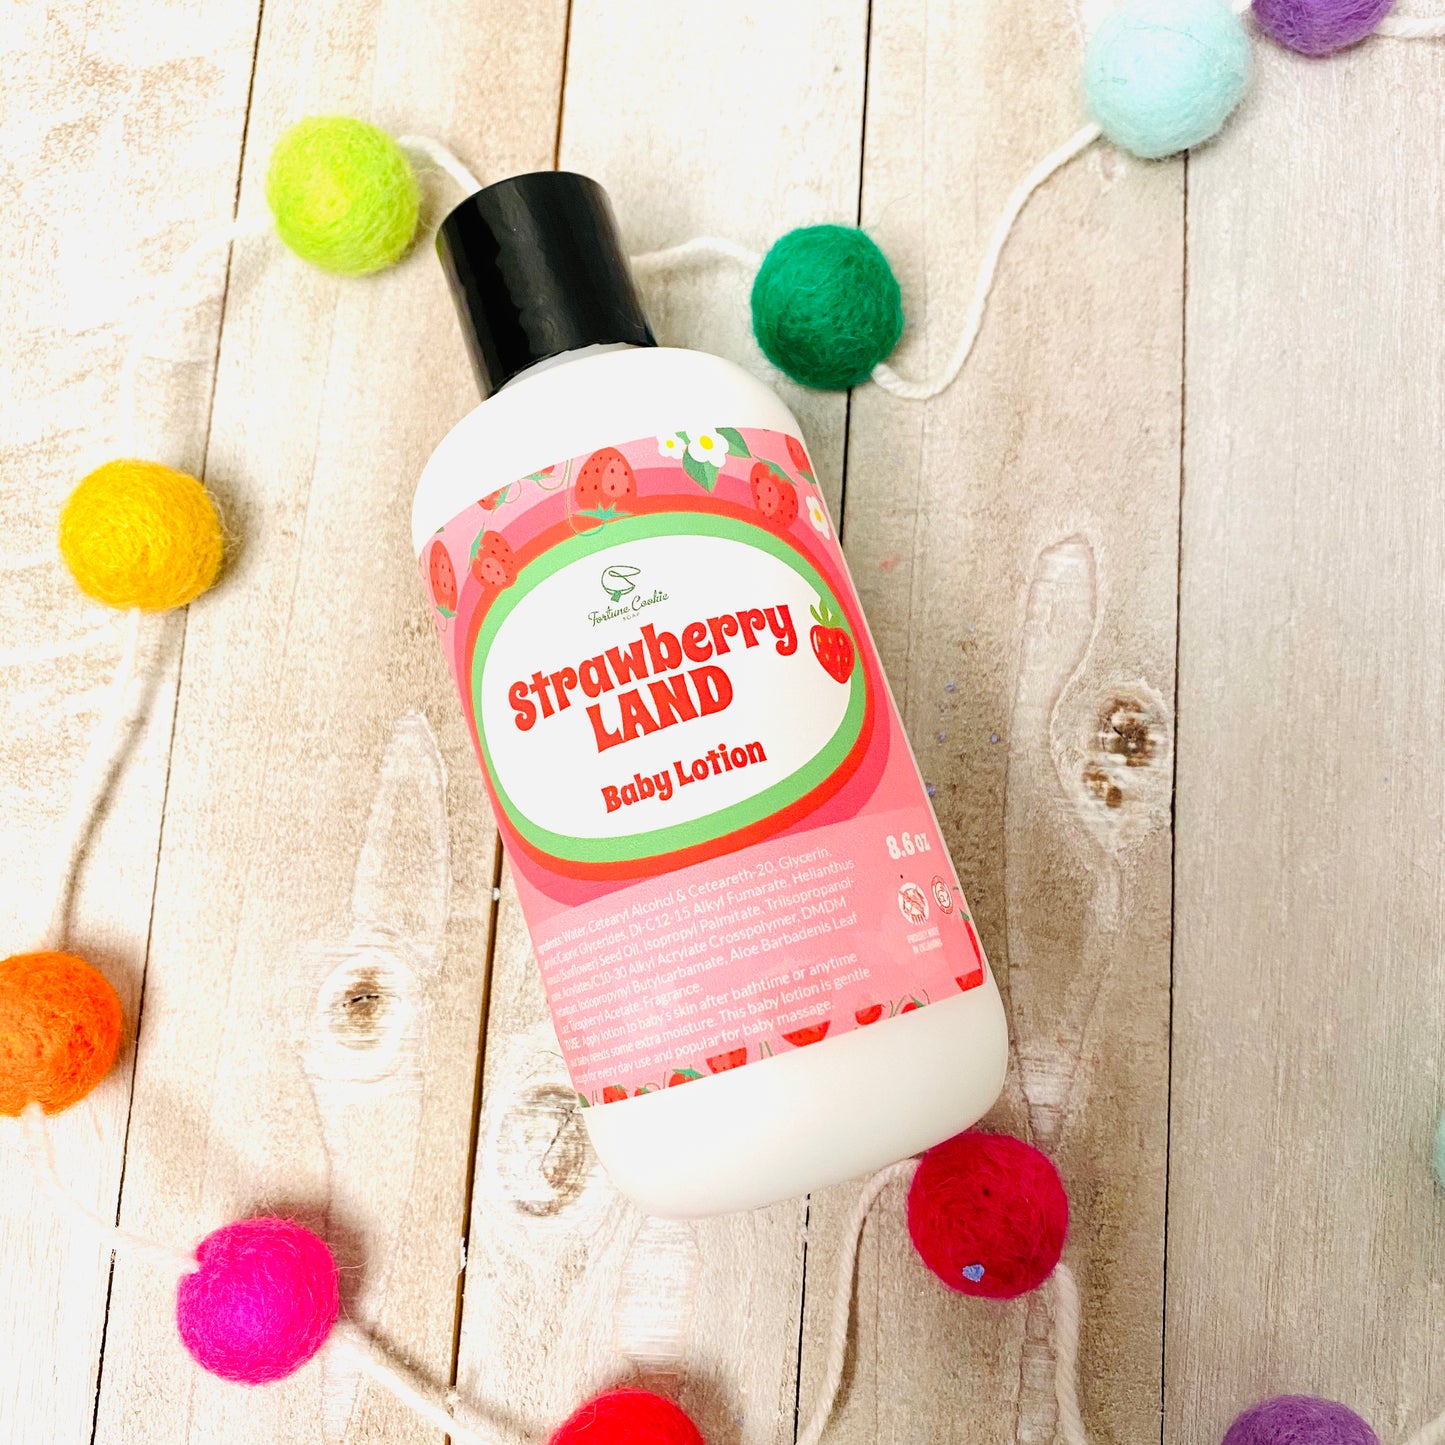 STRAWBERRY LAND Baby Lotion